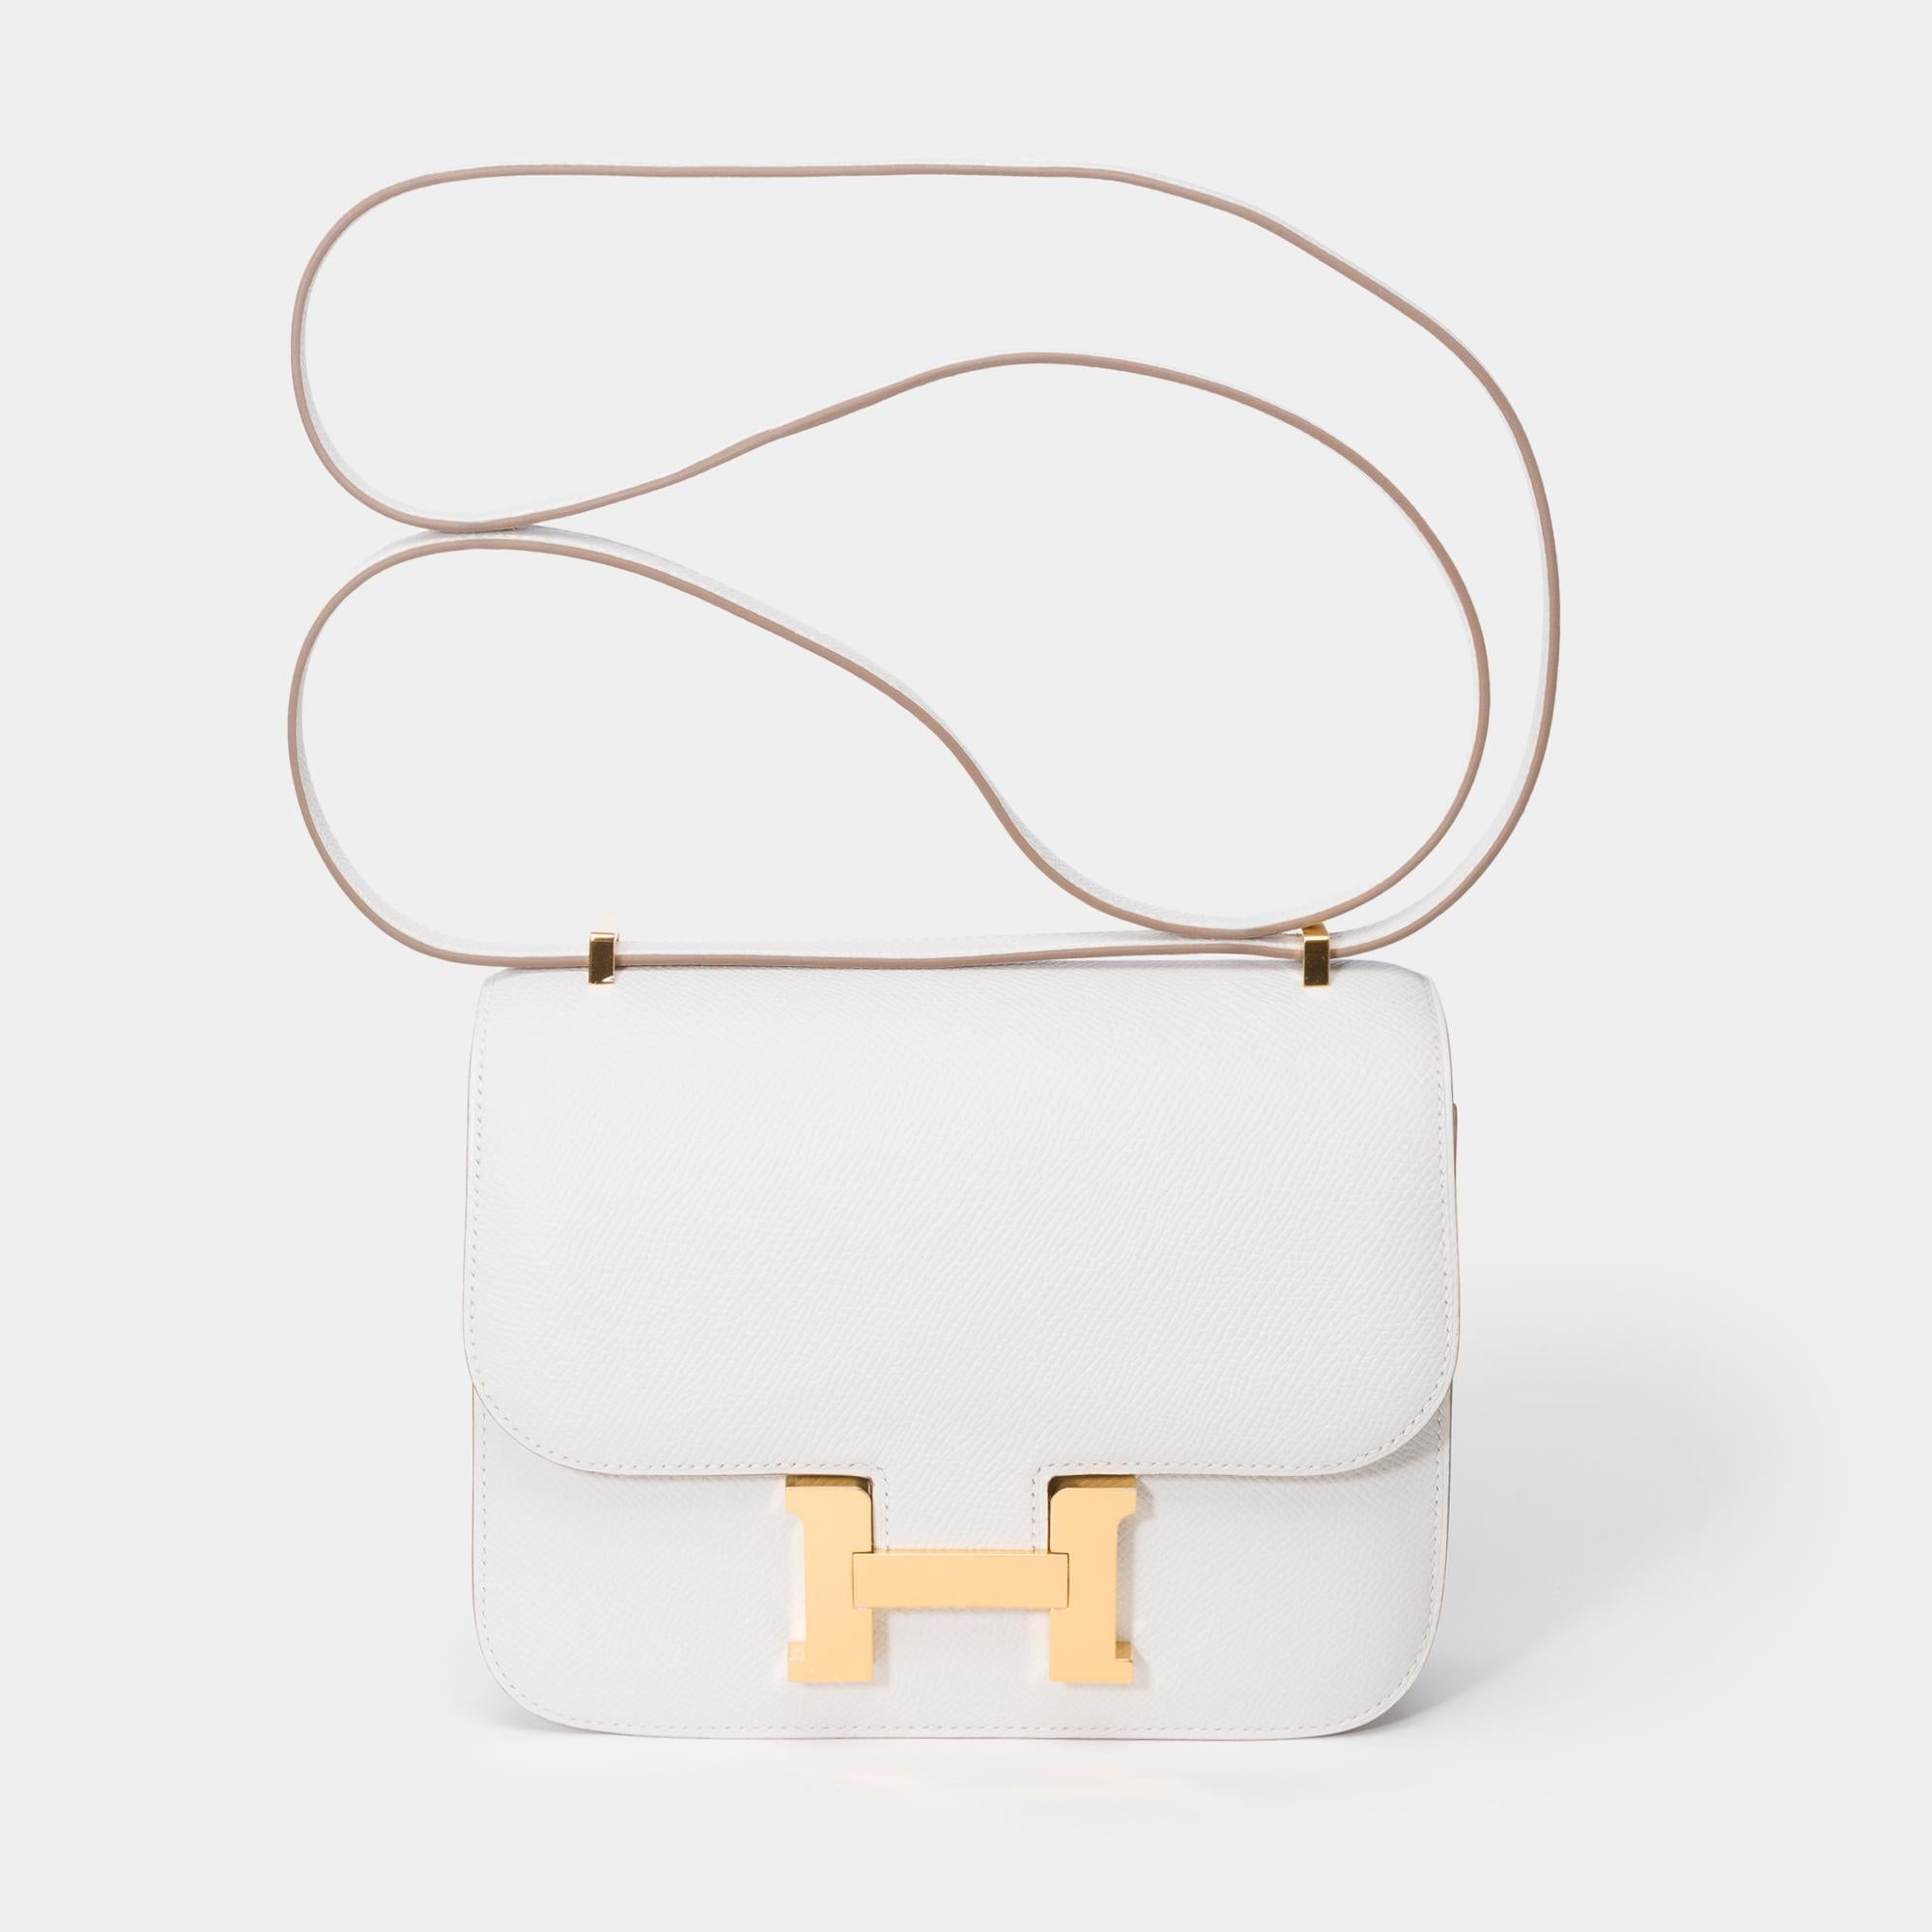 Stunning​​​ ​​Hermès​​ ​​Constance​​ ​​III​​ ​​Mini​​ ​​18​​ ​​Mirror​​ ​​shoulder​​ ​​bag​​ ​​in​​ ​​Gris​ ​Pale​ ​Epsom​​ ​​calf​​ ​​leather,​​ ​​gold​​ ​​plated​​ ​​metal​​ ​​trim​​ ​​,a​​ ​​​grey​ ​epsom​​ ​​leather​​ ​​shoulder​​ ​​strap​​